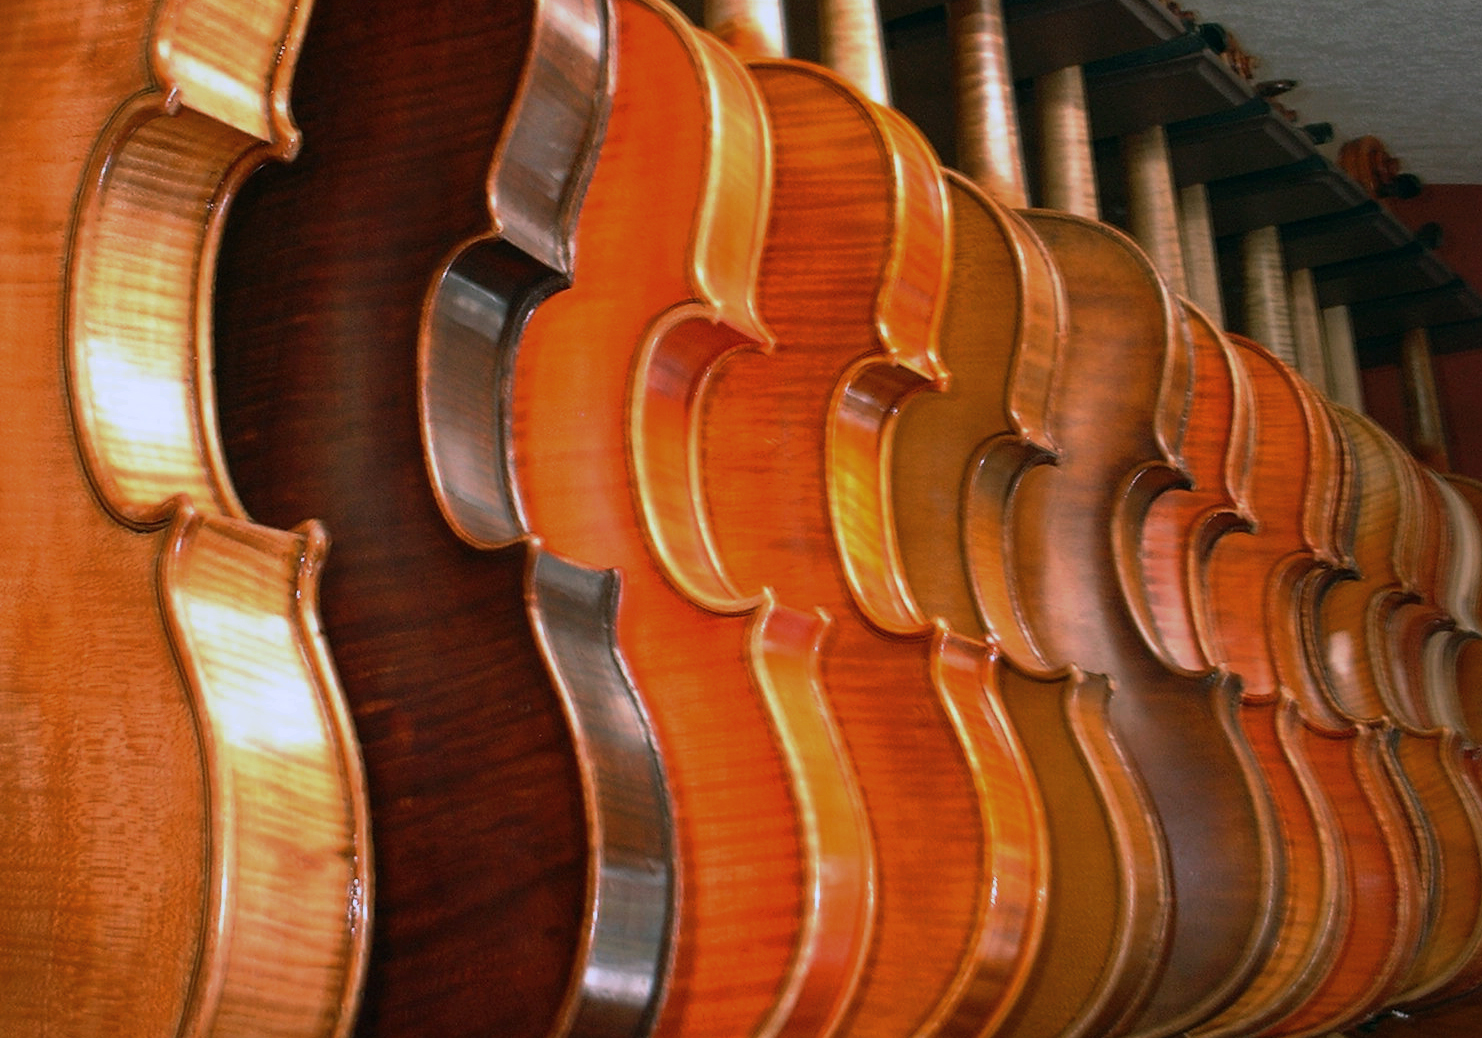 Violins hanging side by side in Fiddleheads' shop